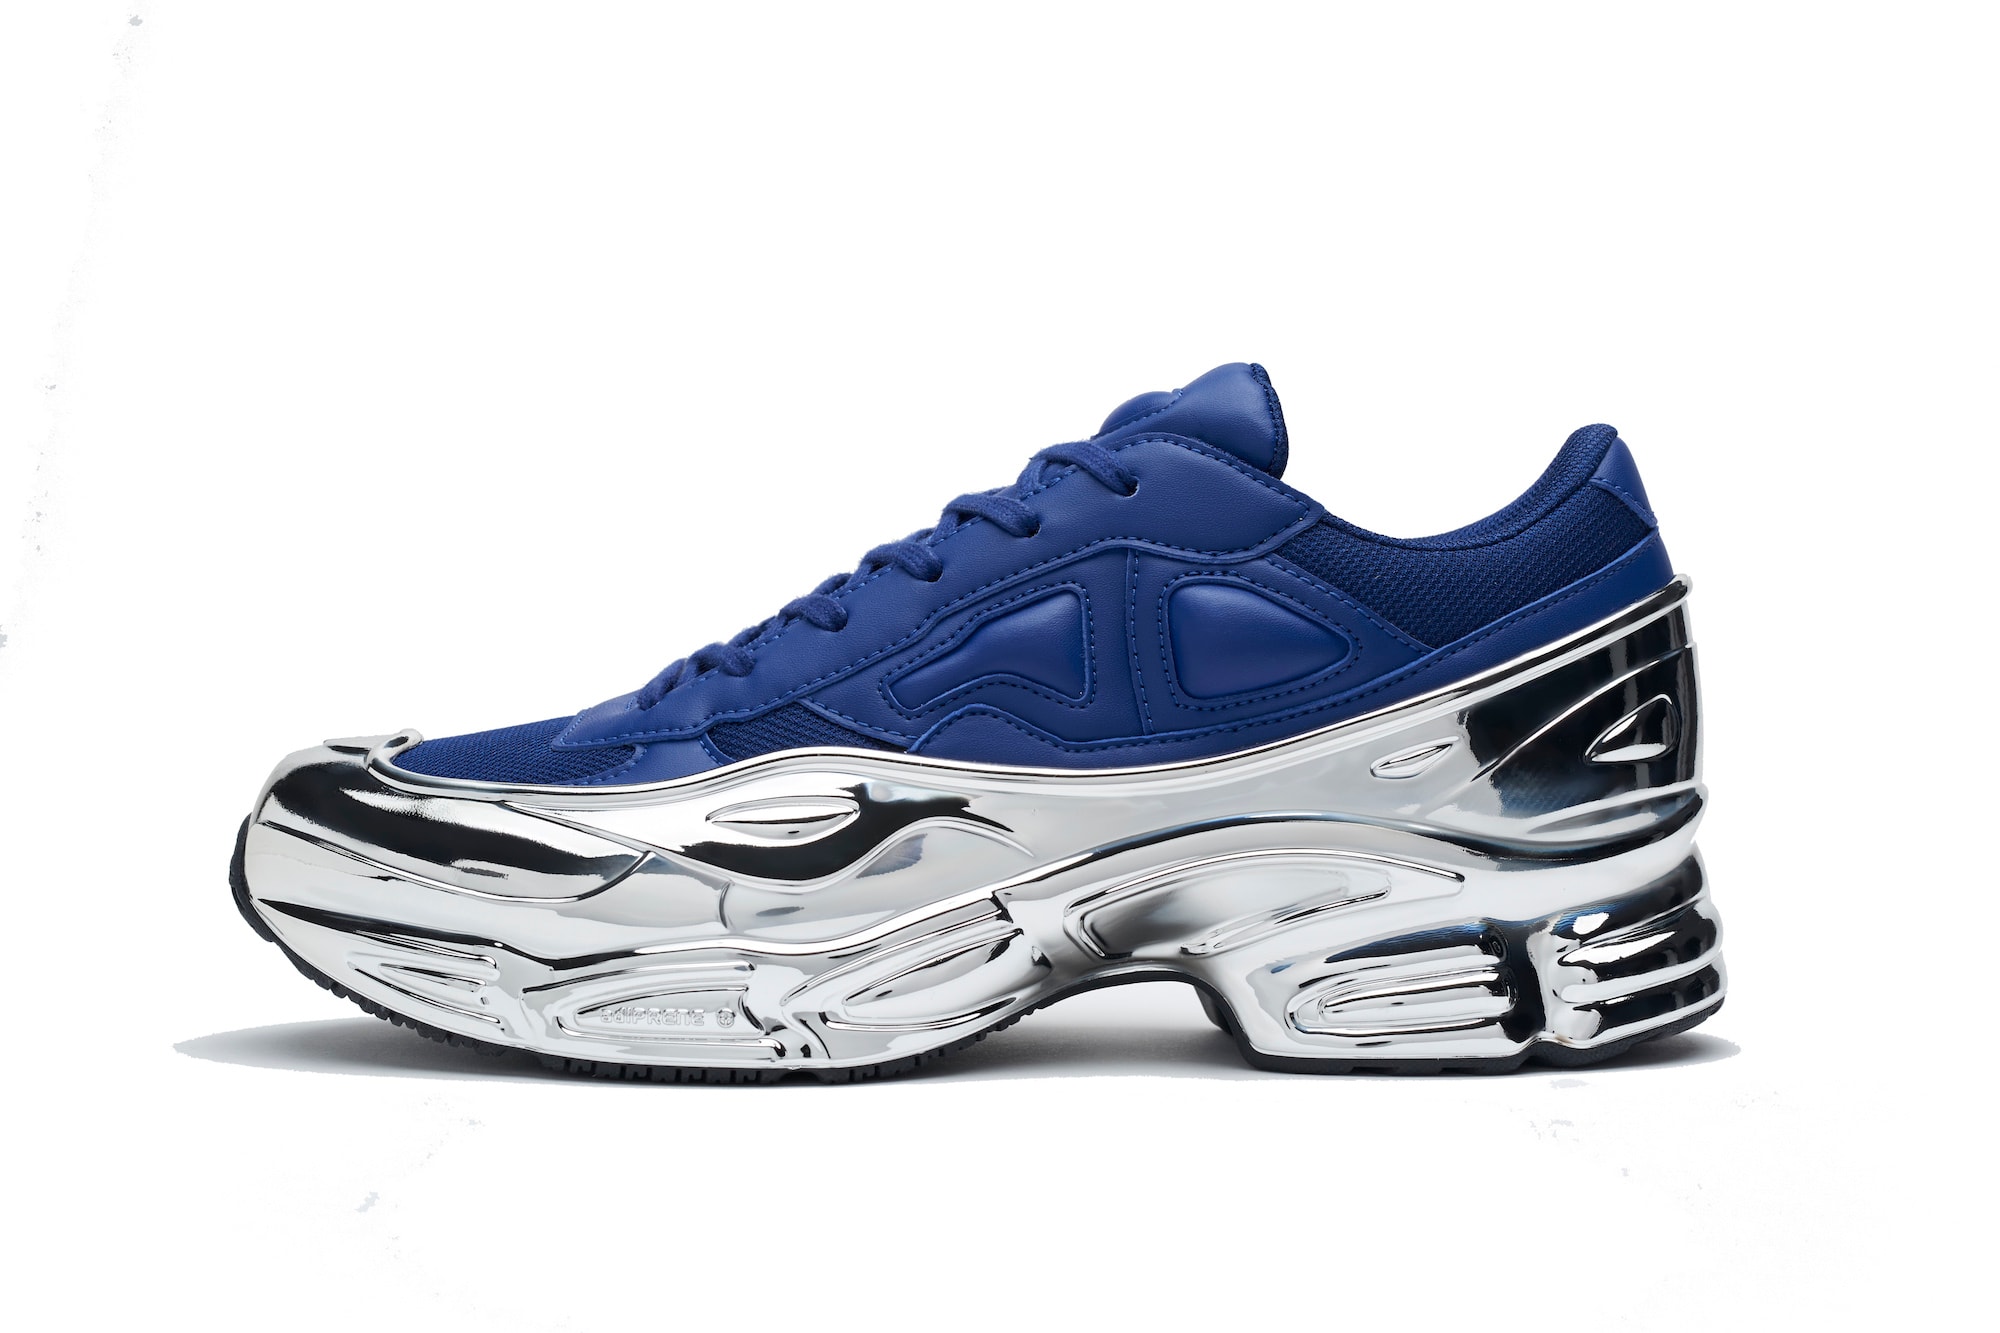 adidas by Raf Simons RS Ozweego Metallic Silver Release Colorways Sneakers 